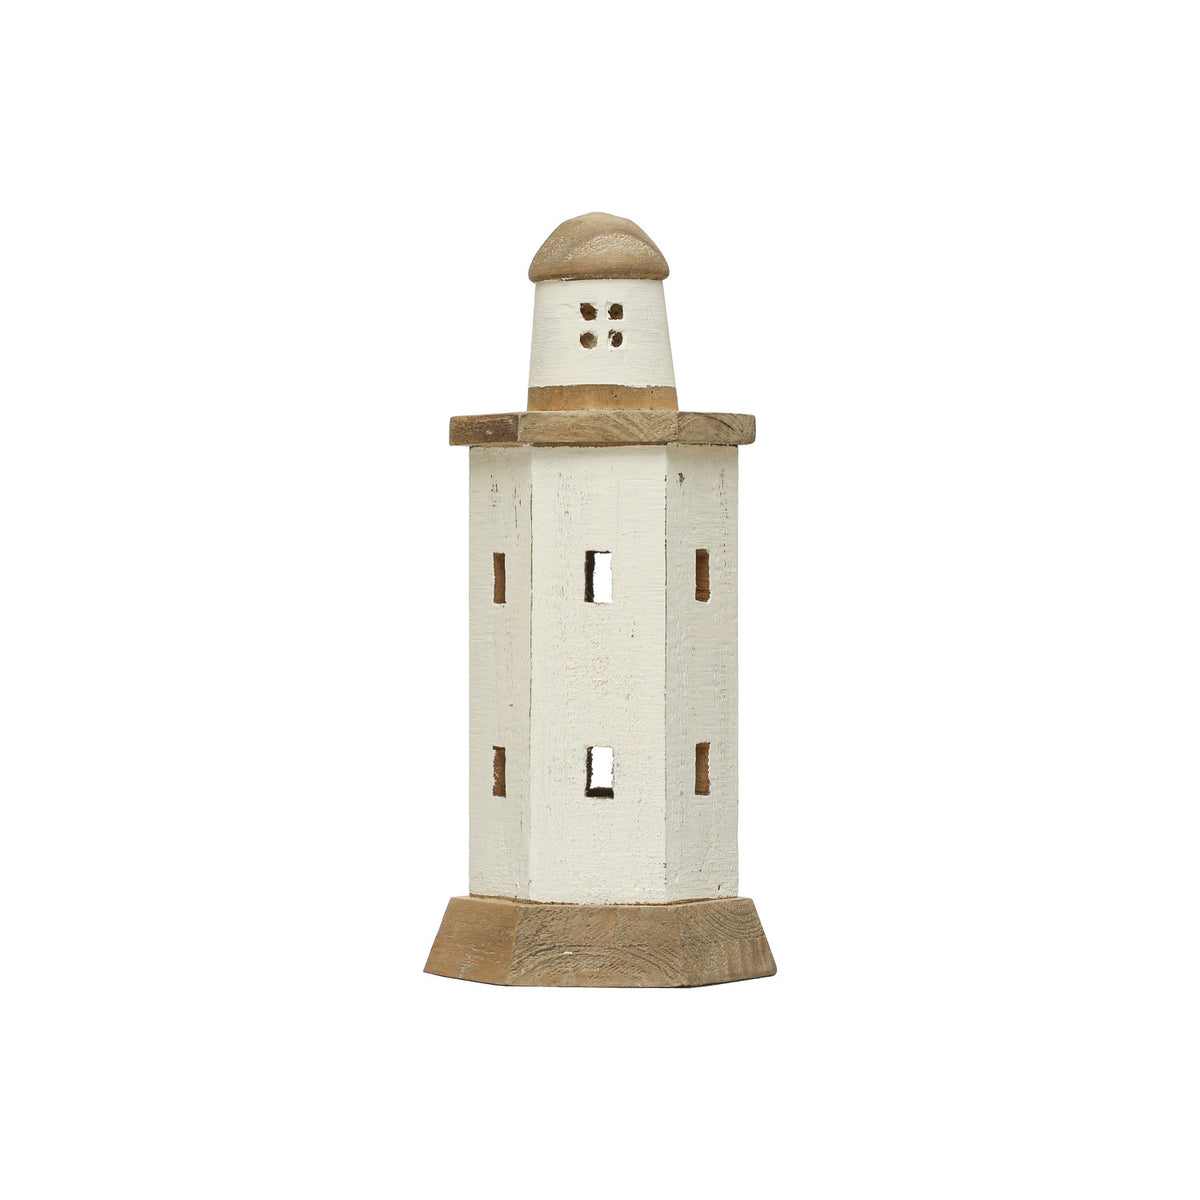 11.25"H Wood Lighthouse, White & Natural